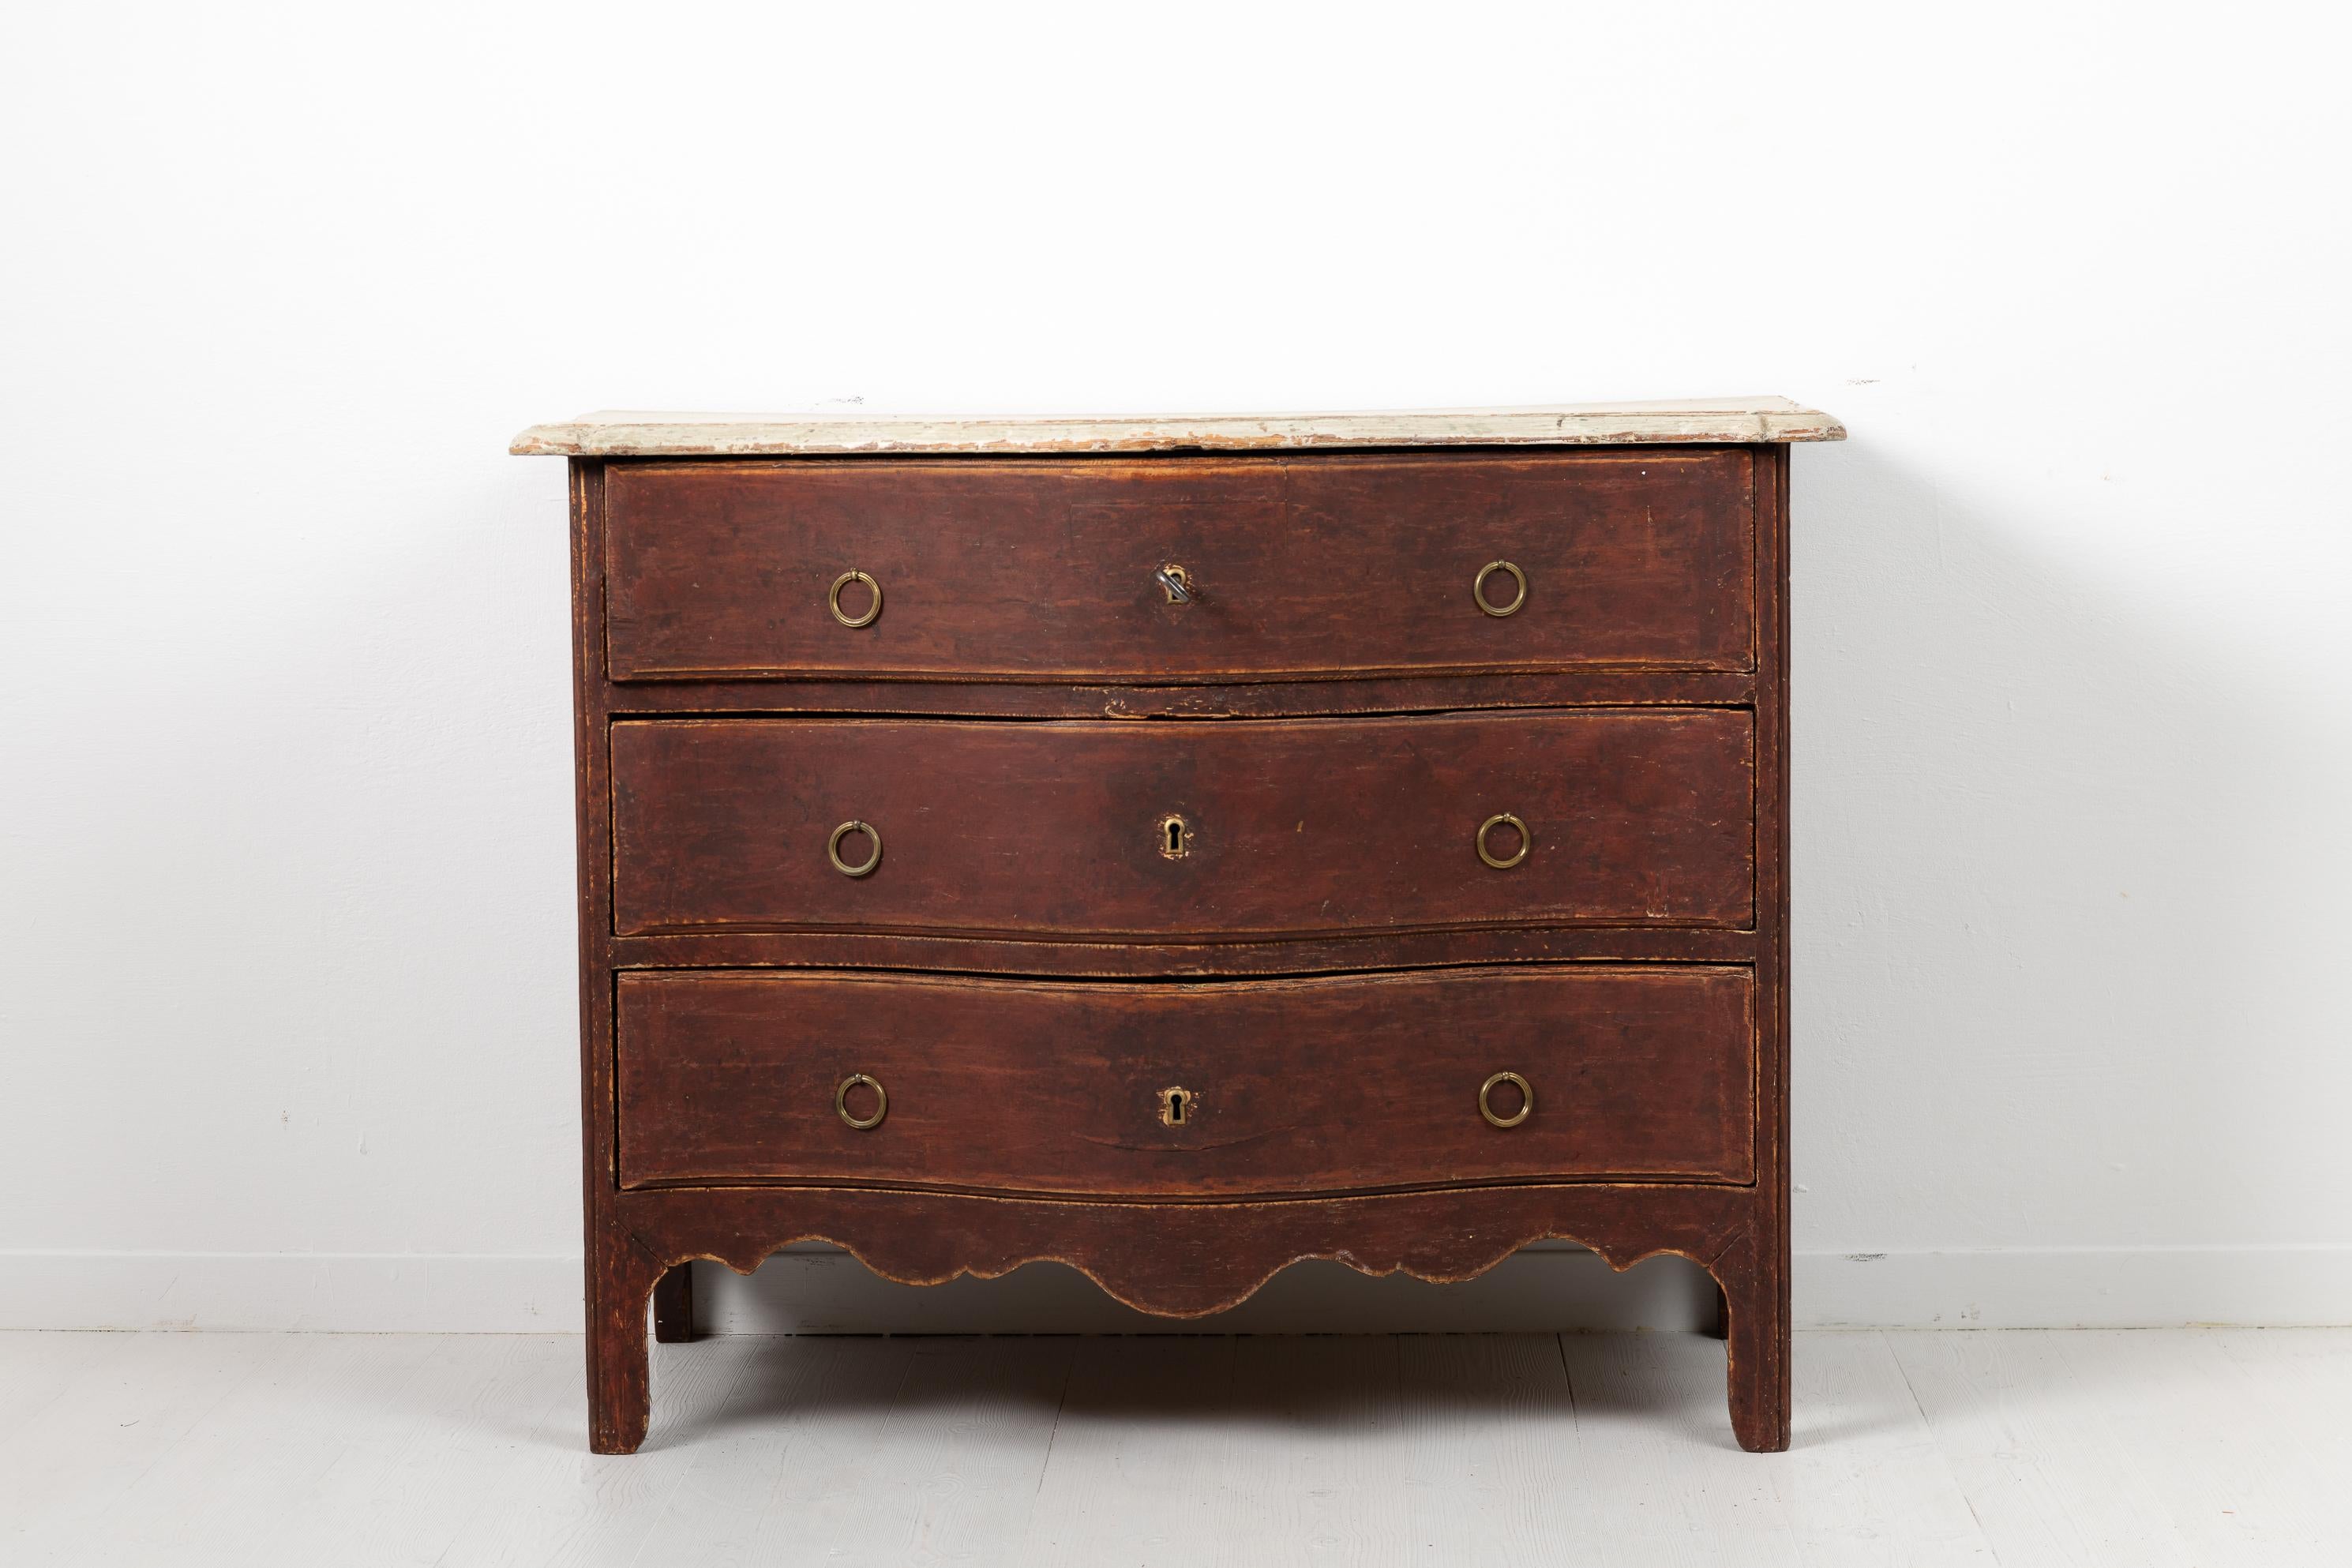 Baroque chest of drawers from Sweden made during the mid to late 1700s, around 1760 to 1770. The chest has old paint with distress and patina. The chest of drawers is an early example of great craftsmanship with a solid construction and great